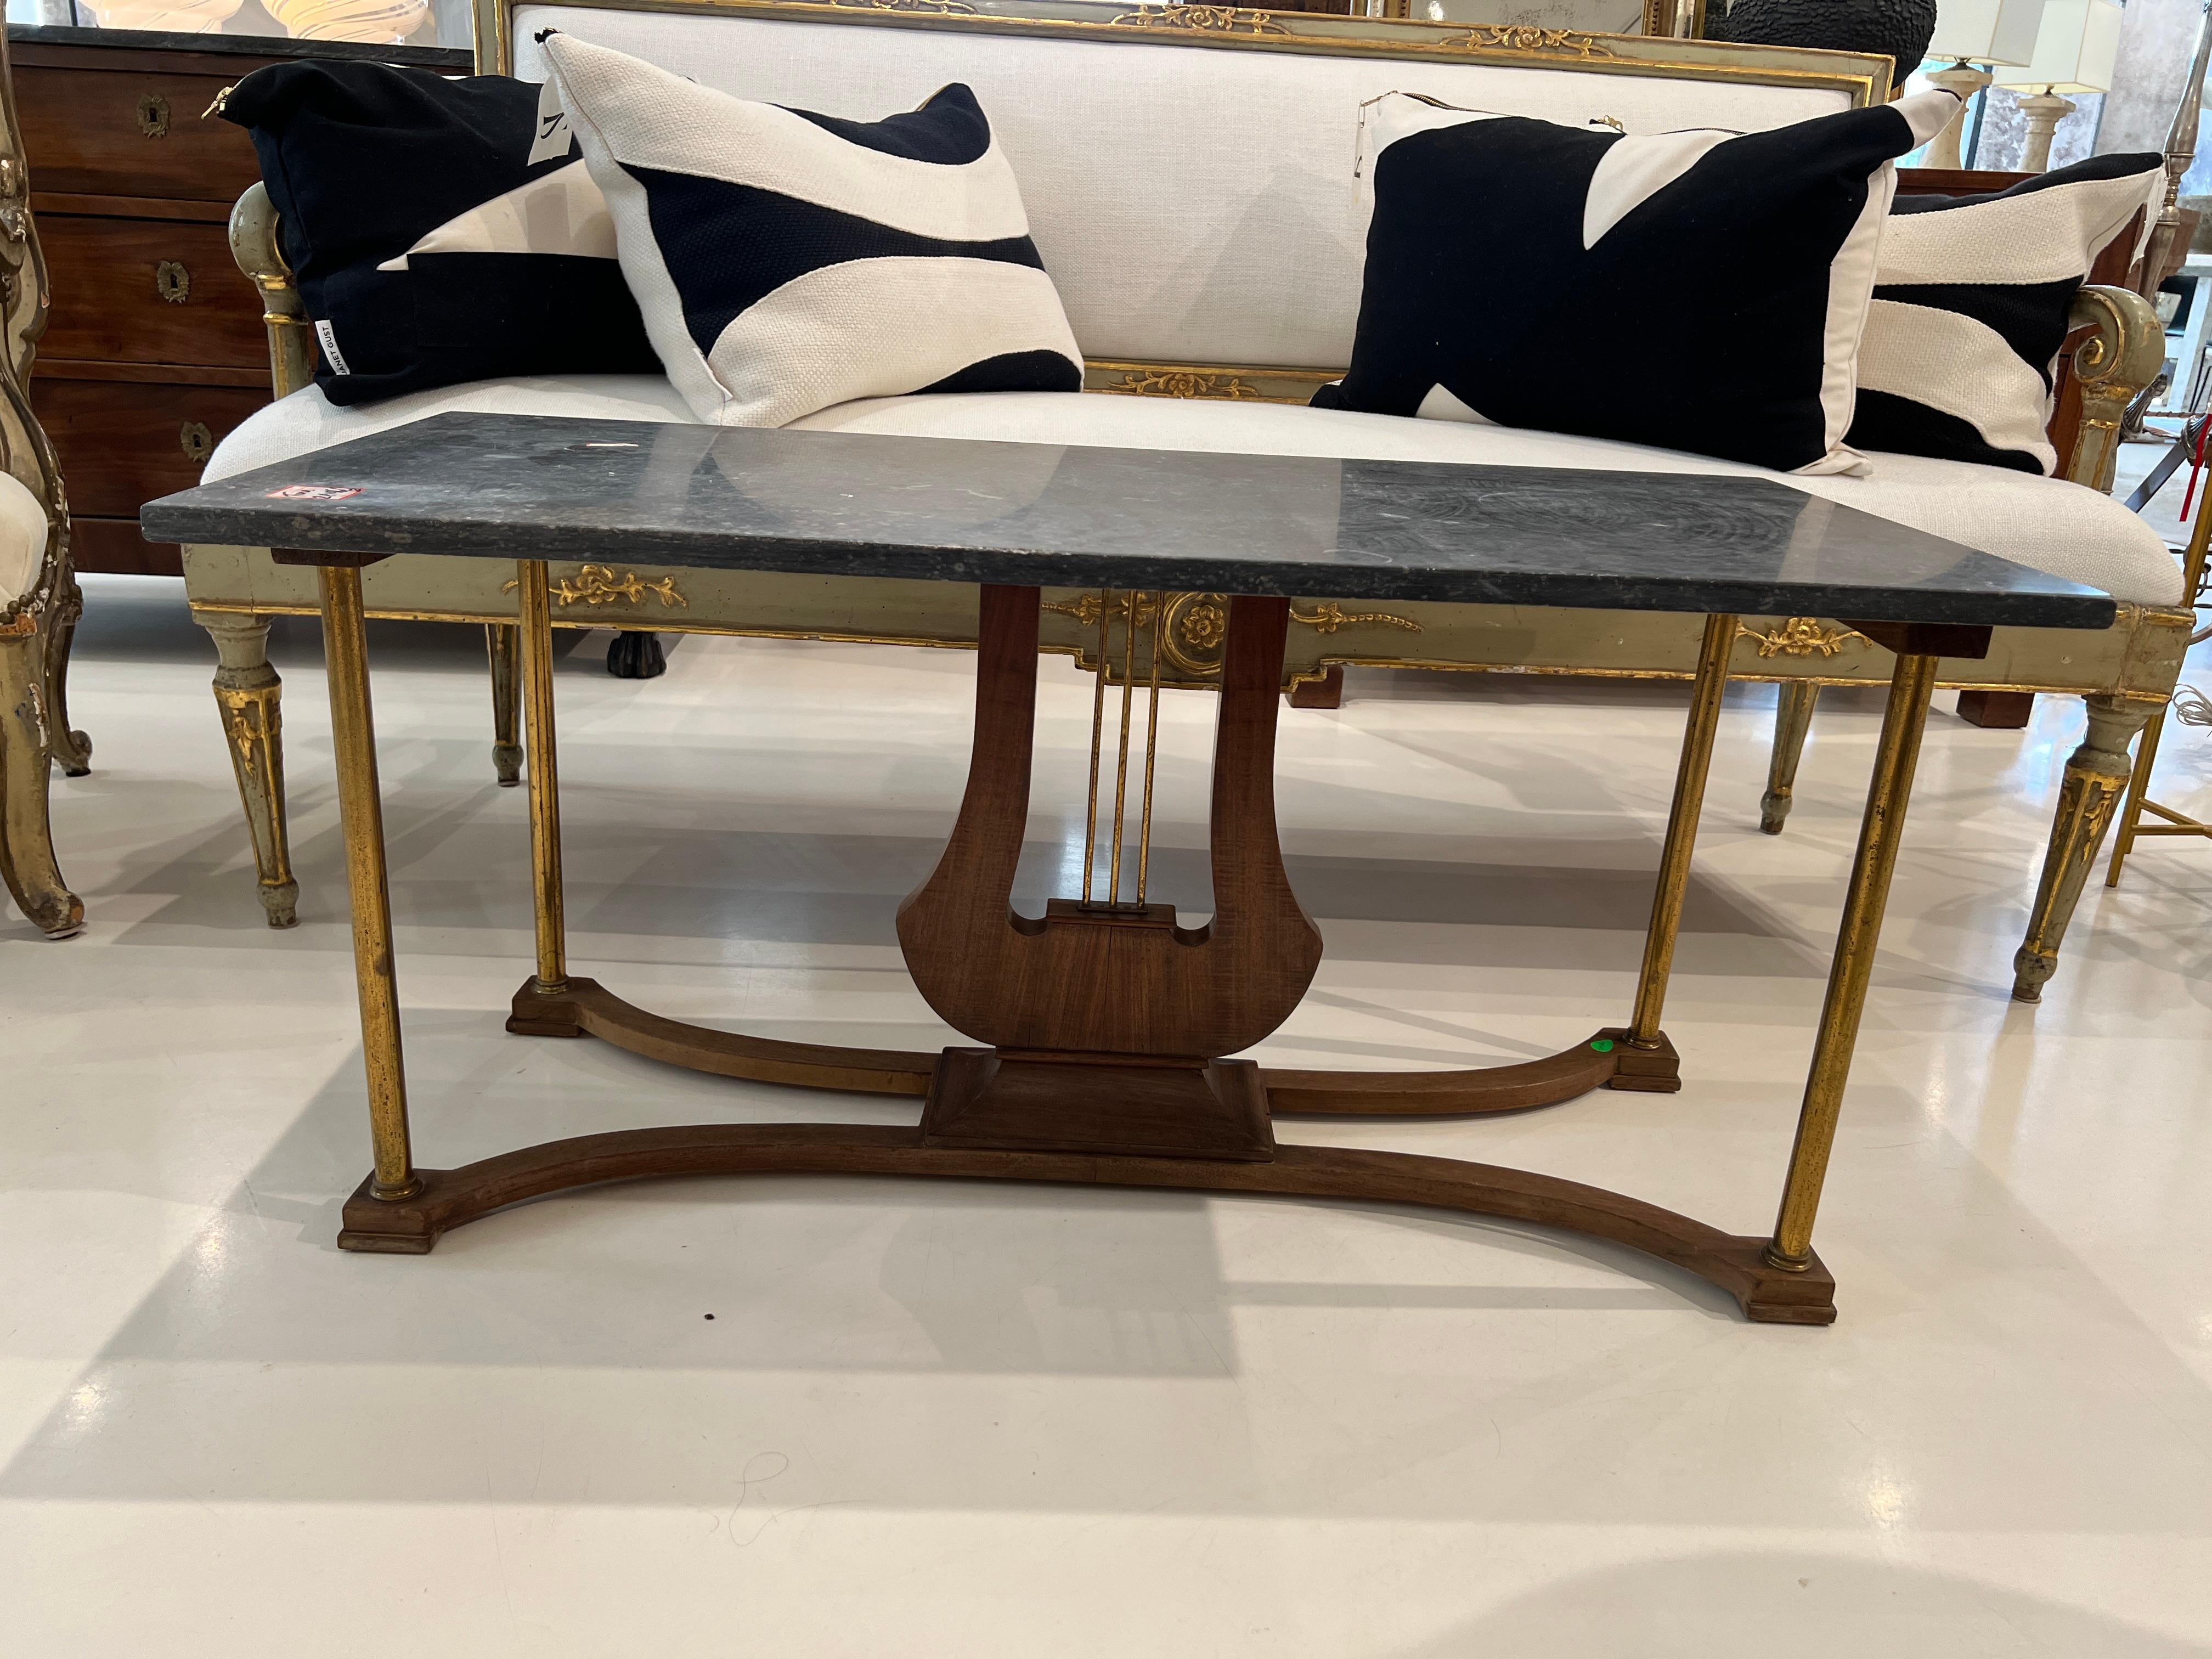 The dark marble top is supported by a lyre shaped base and brass legs. This vintage french coffee table will make a beautiful addition to any seating area. 